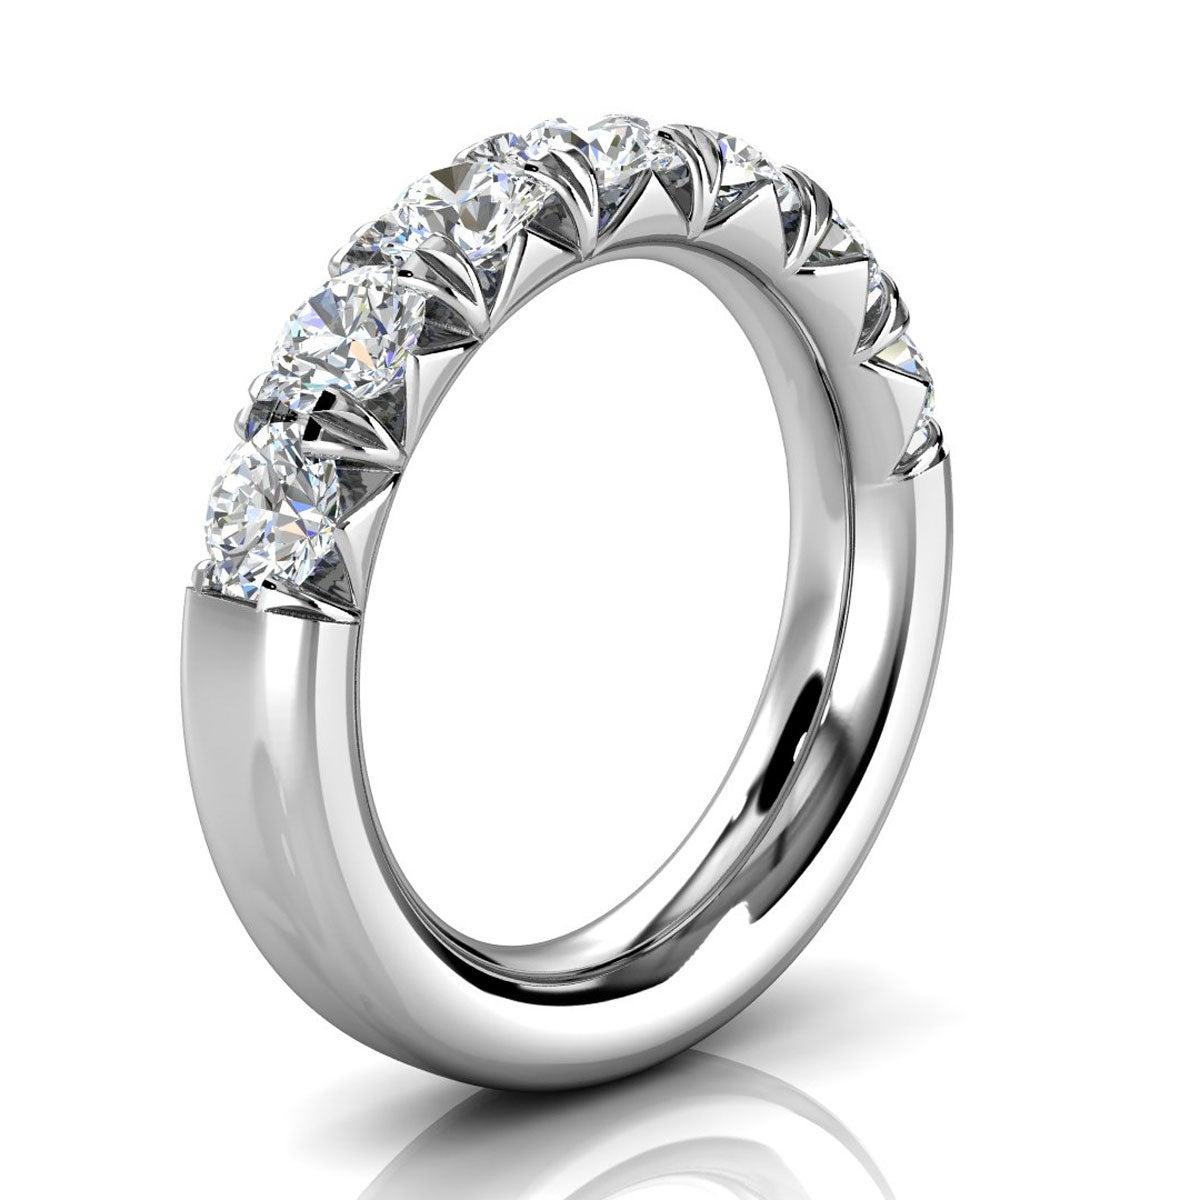 For Sale:  18k White Gold Voyage French Pave Diamond Ring '2 Ct. Tw' 2